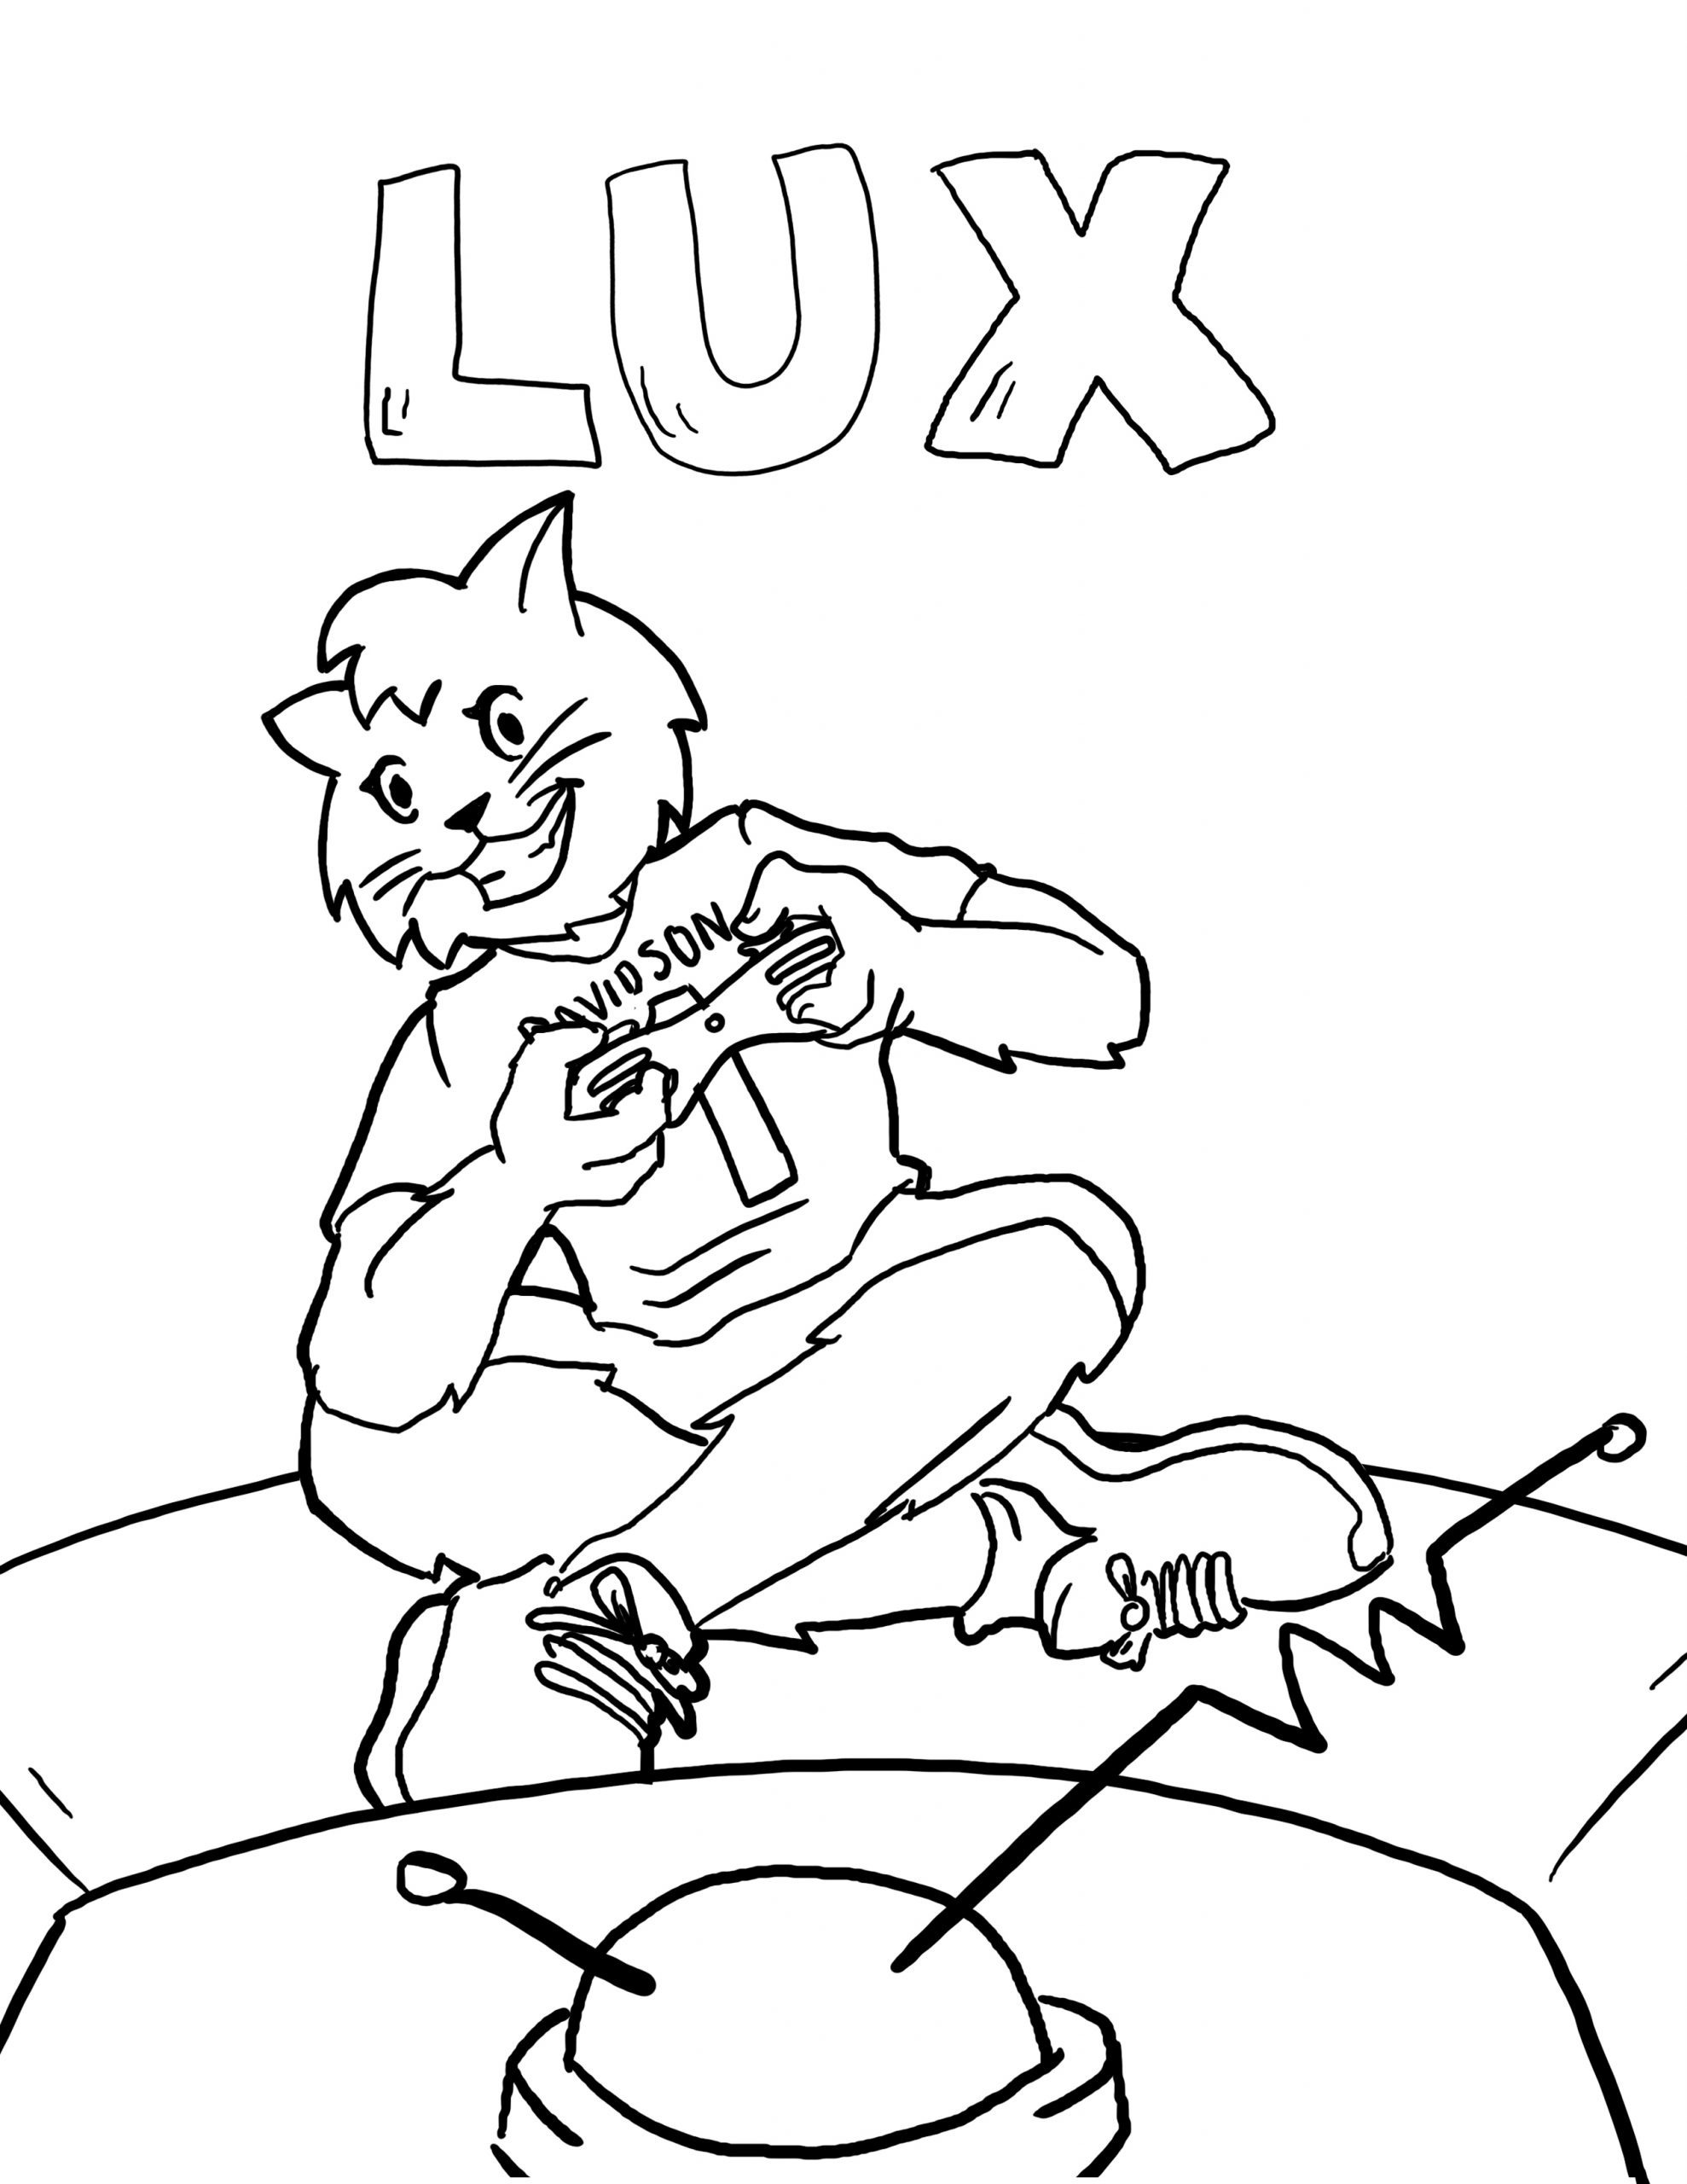 Lux Playing Video Games Coloring Page